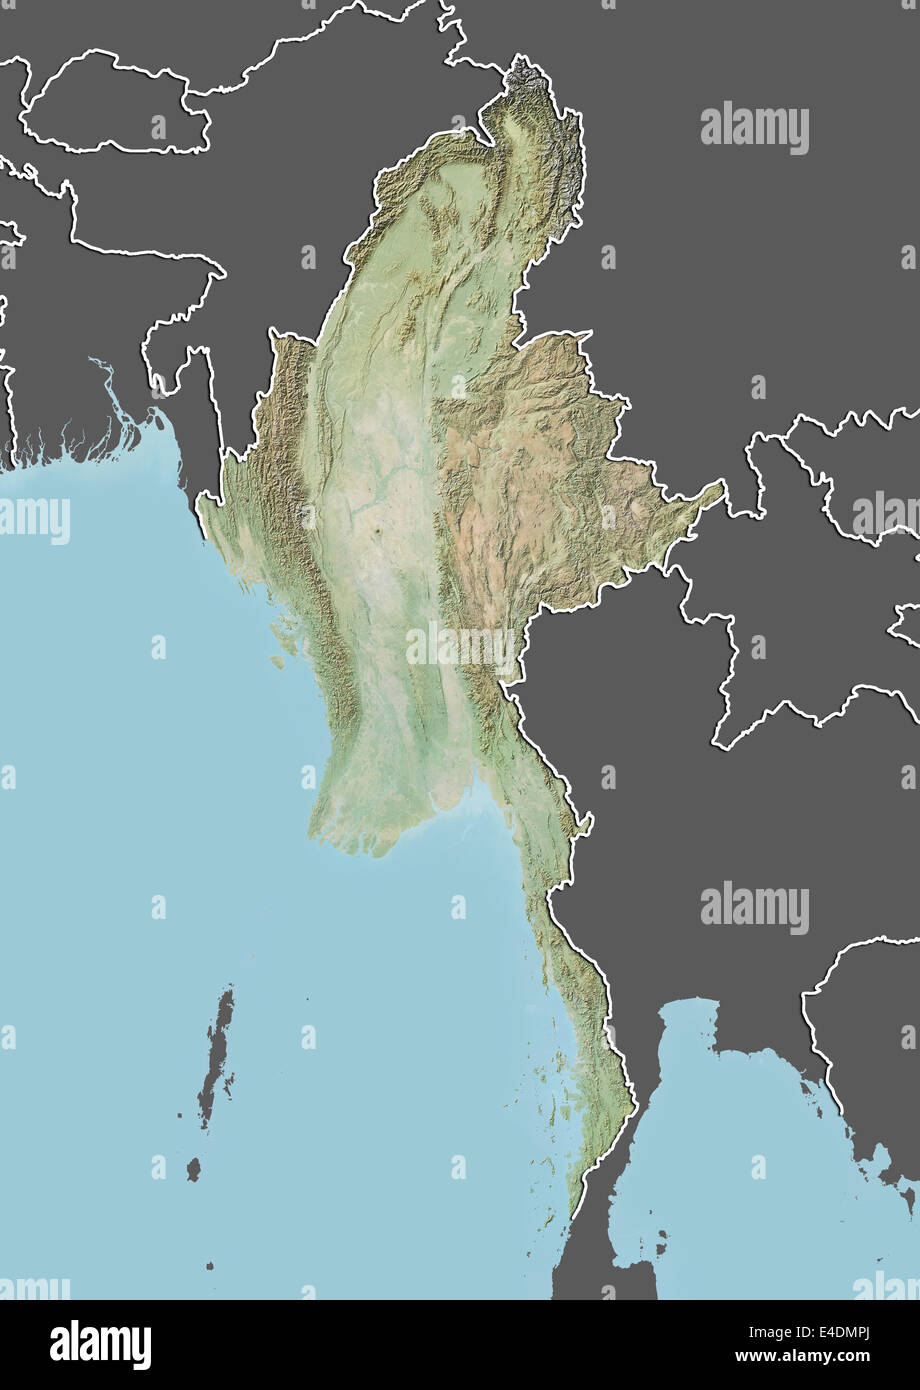 Myanmar, Relief Map With Border and Mask Stock Photo